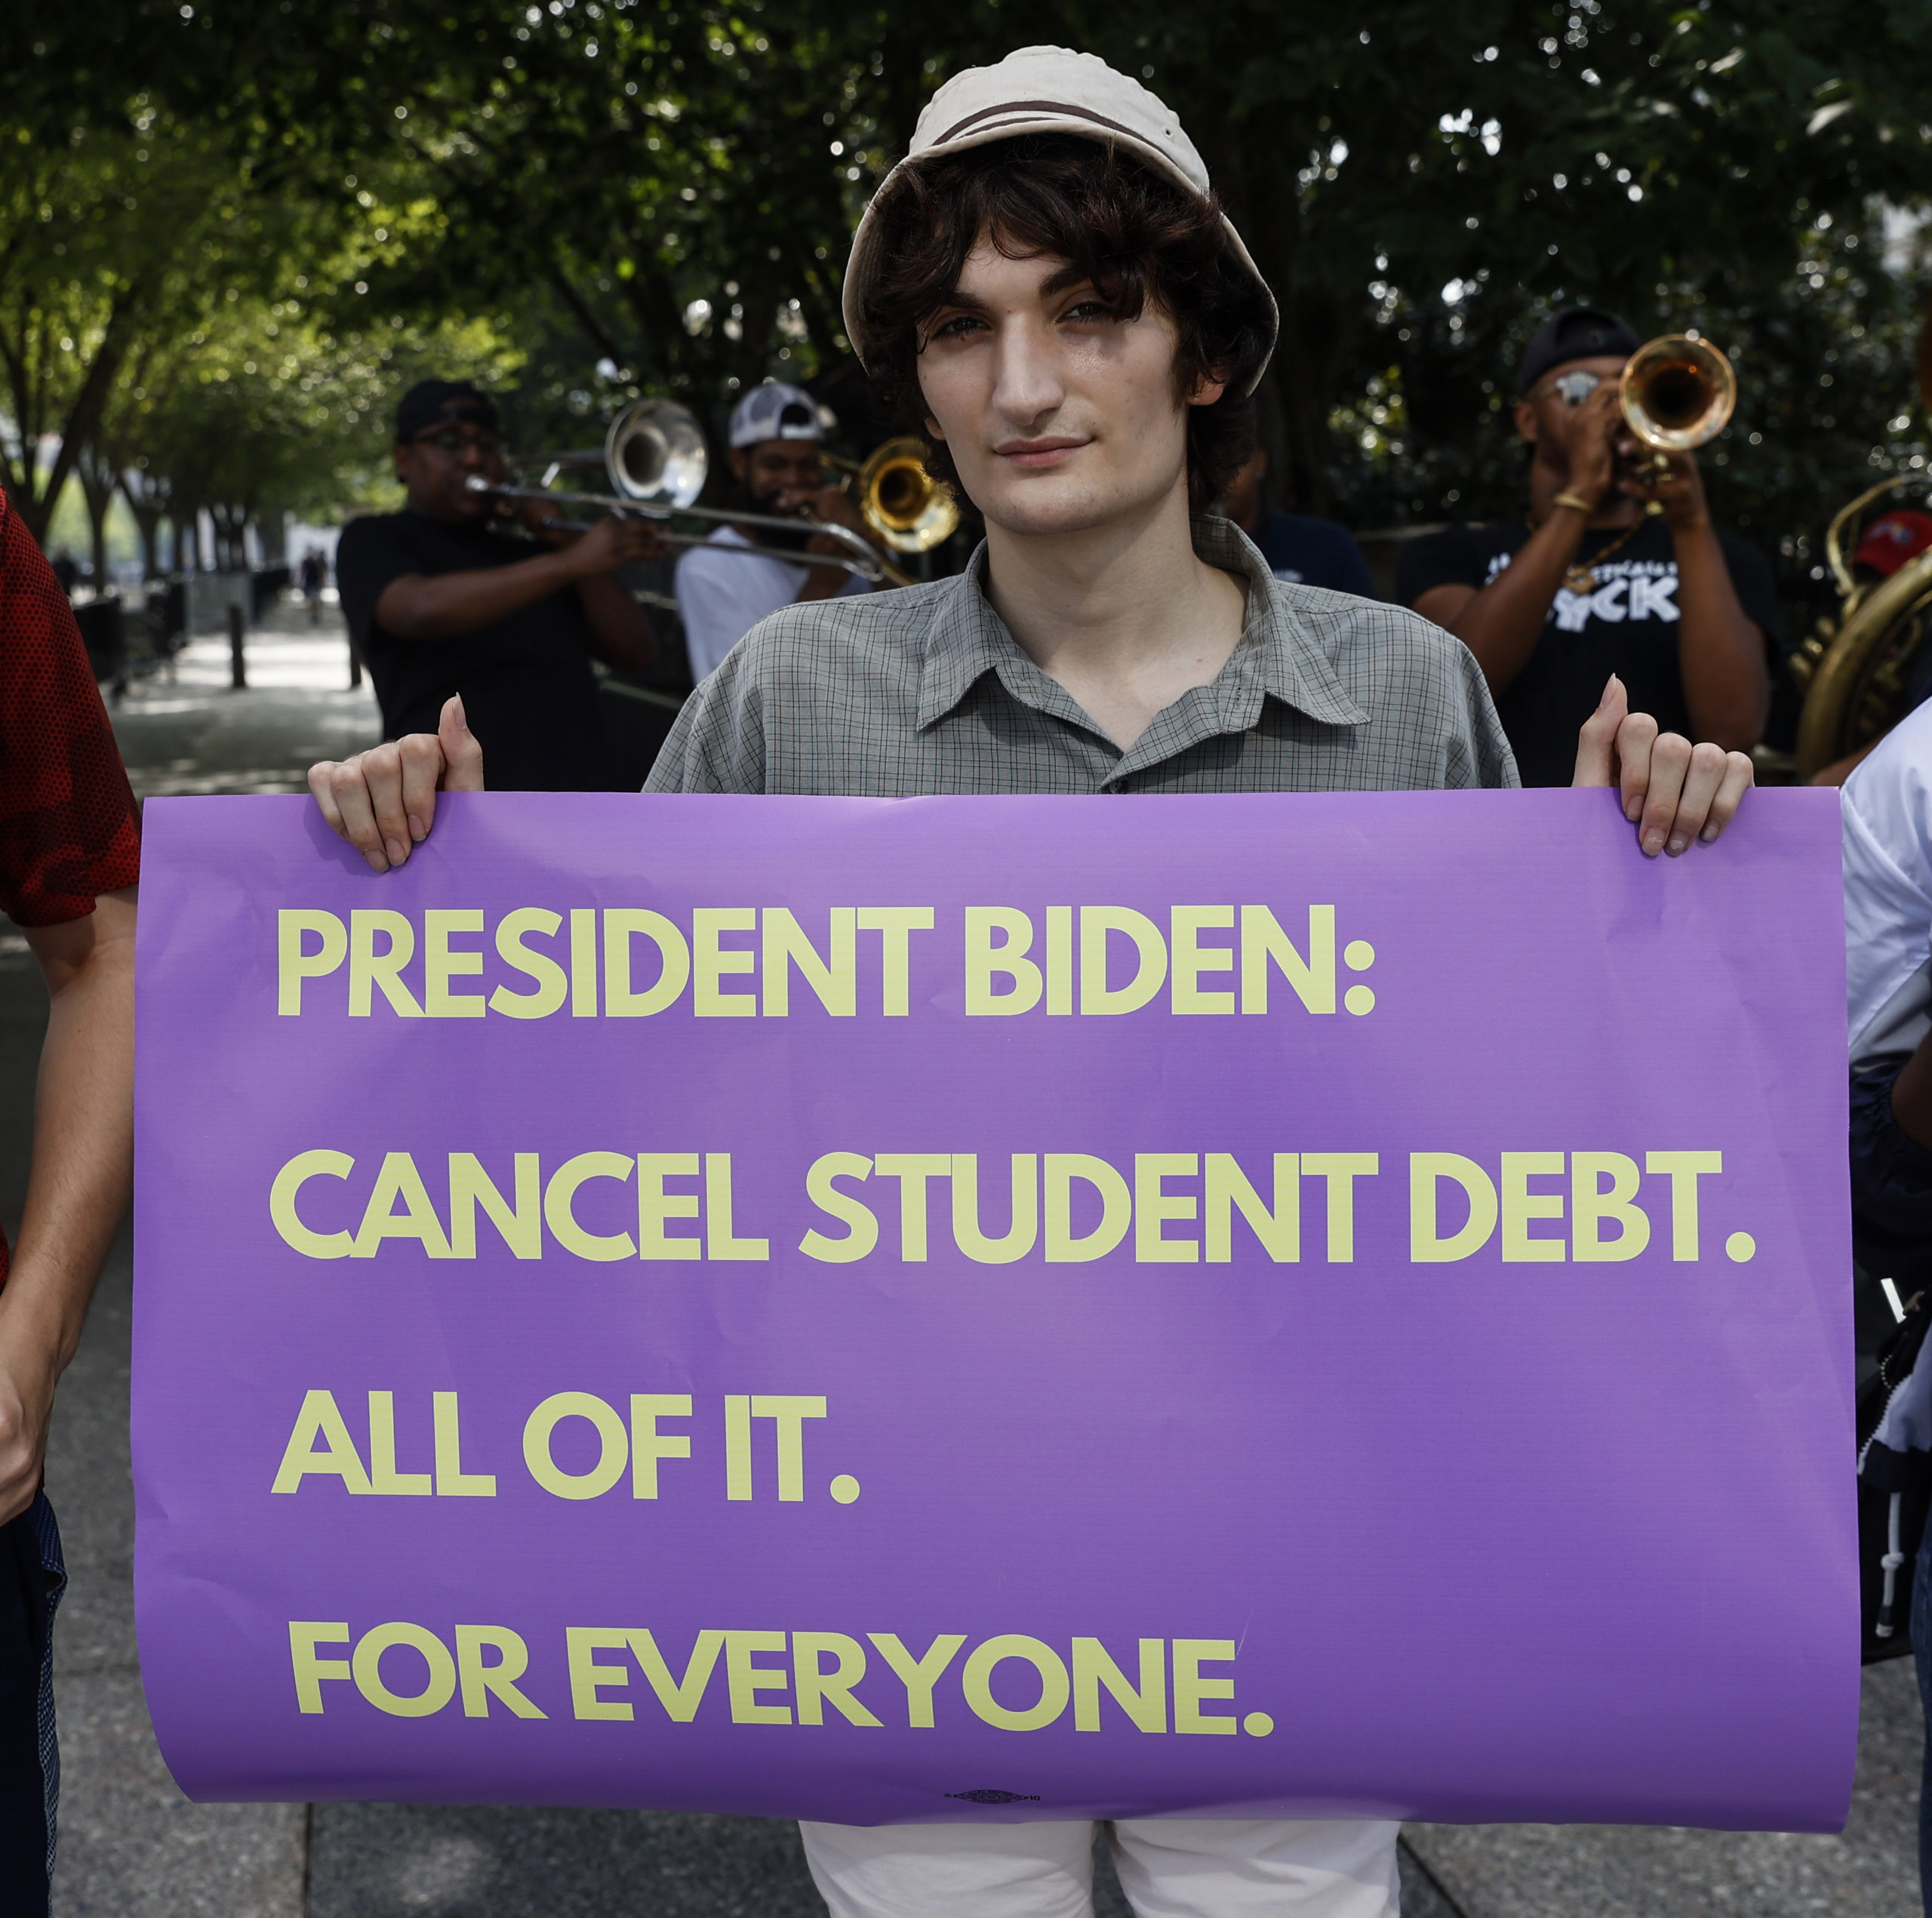 Student loan debt holders take part in a demonstration outside of the white house staff entrance to demand that President Biden cancel student loan debt in August on July 27, 2022 at the Executive Offices in Washington, DC. (Photo by Jemal Countess/Getty Images for We, The 45 Million)